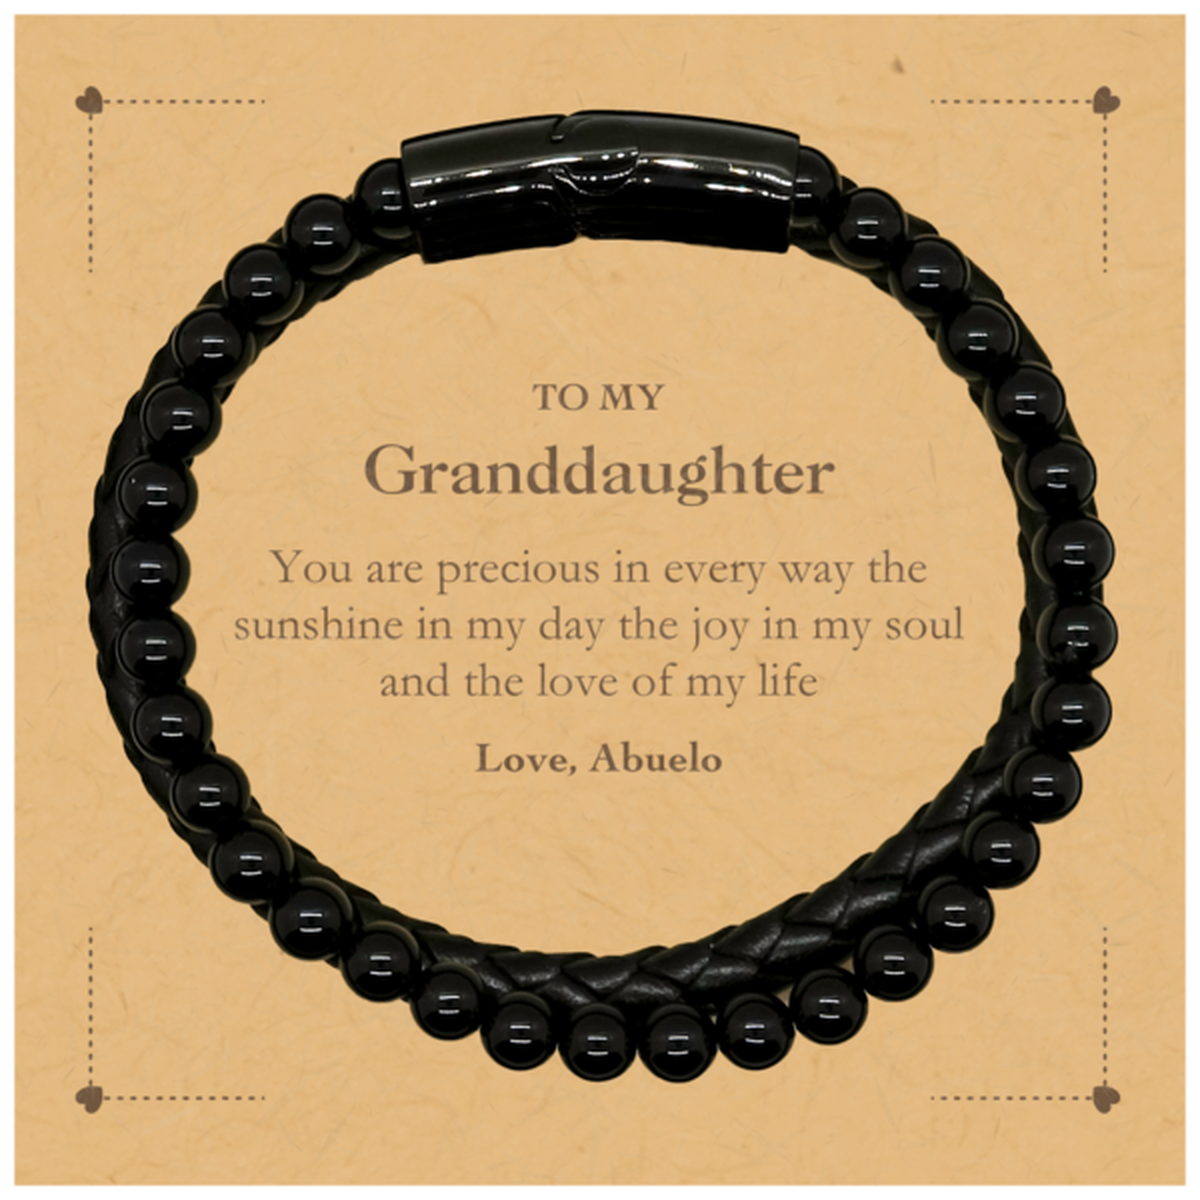 Graduation Gifts for Granddaughter Stone Leather Bracelets Present from Abuelo, Christmas Granddaughter Birthday Gifts Granddaughter You are precious in every way the sunshine in my day. Love, Abuelo